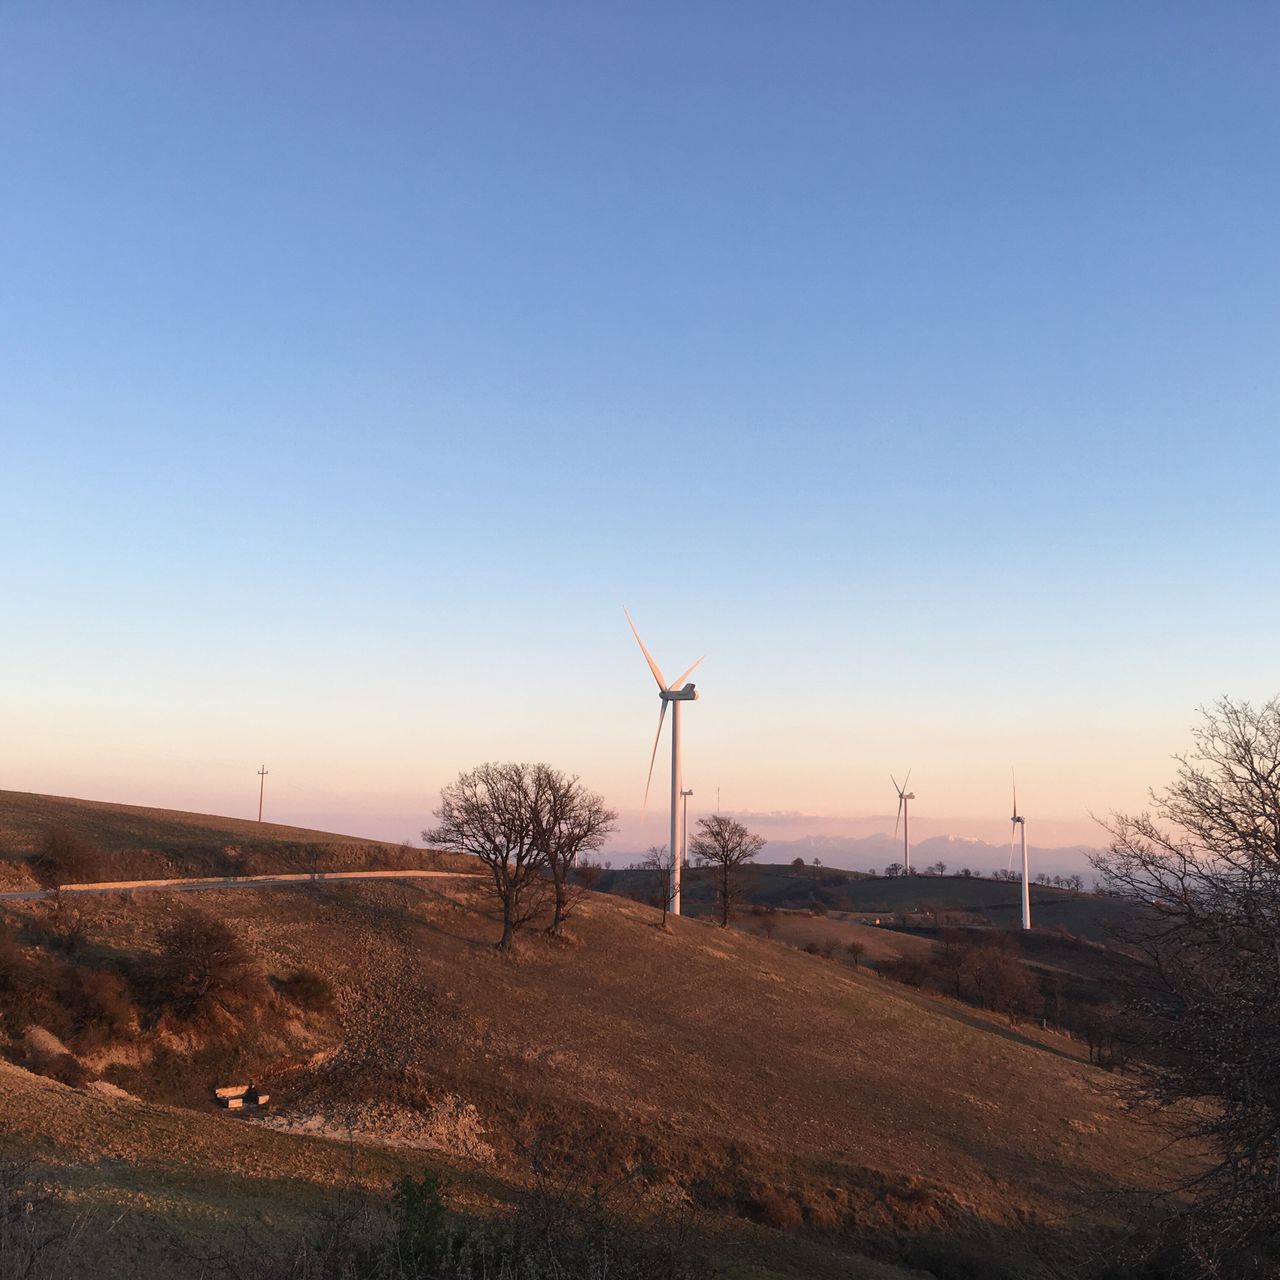 nature, fuel and power generation, wind turbine, no people, renewable energy, environmental conservation, alternative energy, wind power, sand, sky, clear sky, outdoors, beach, windmill, beauty in nature, sunset, landscape, technology, day